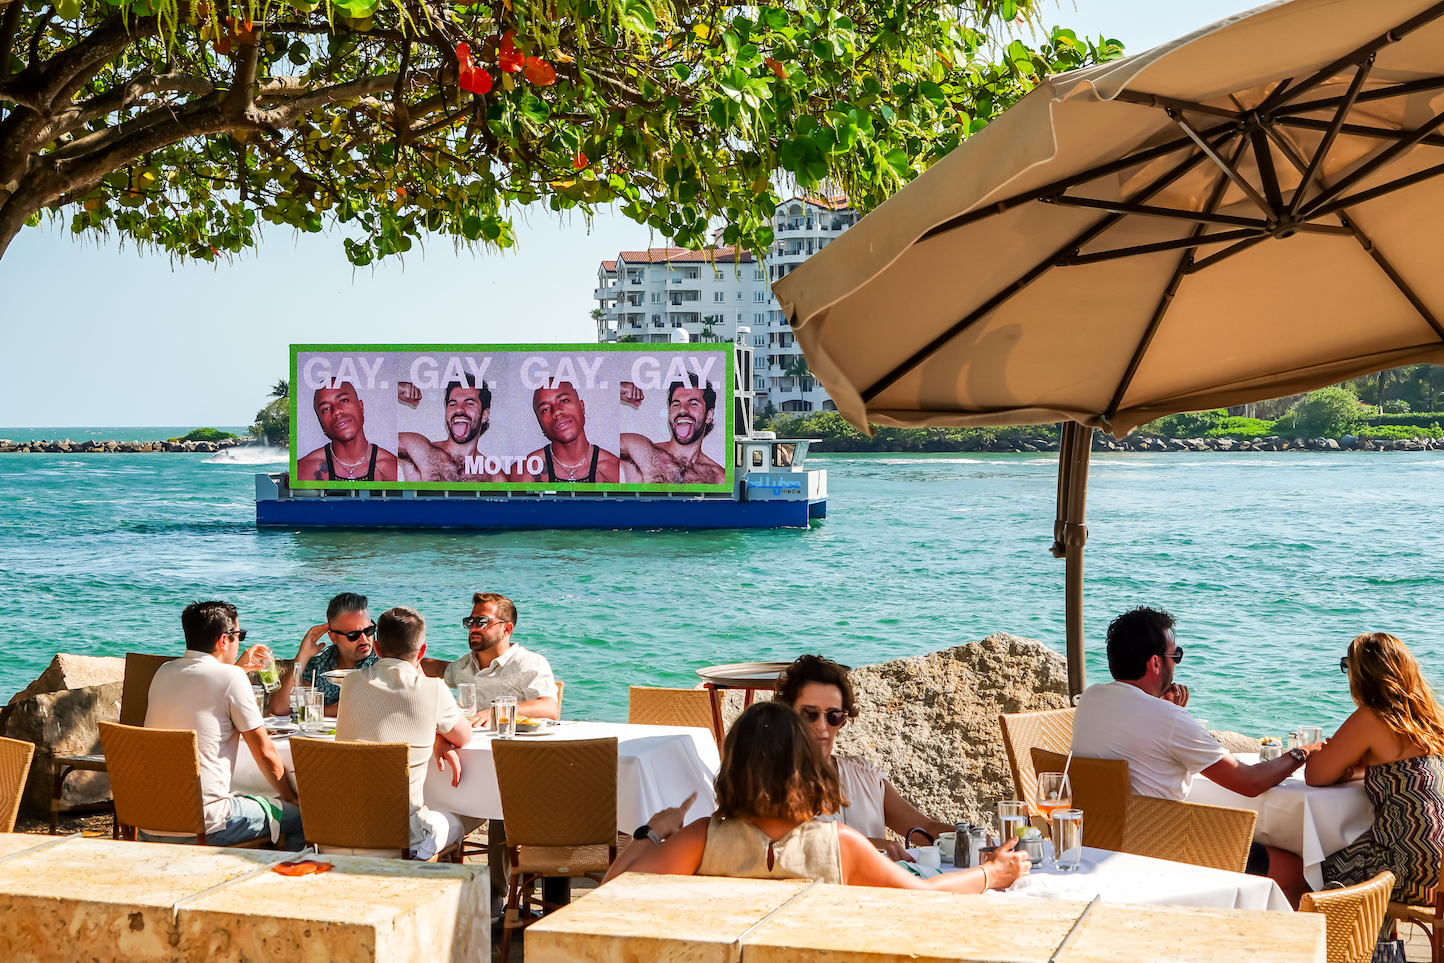 A boat with a digital billboard of the Motto campaign seen in the distance behind a group of people at an outdoor cafe